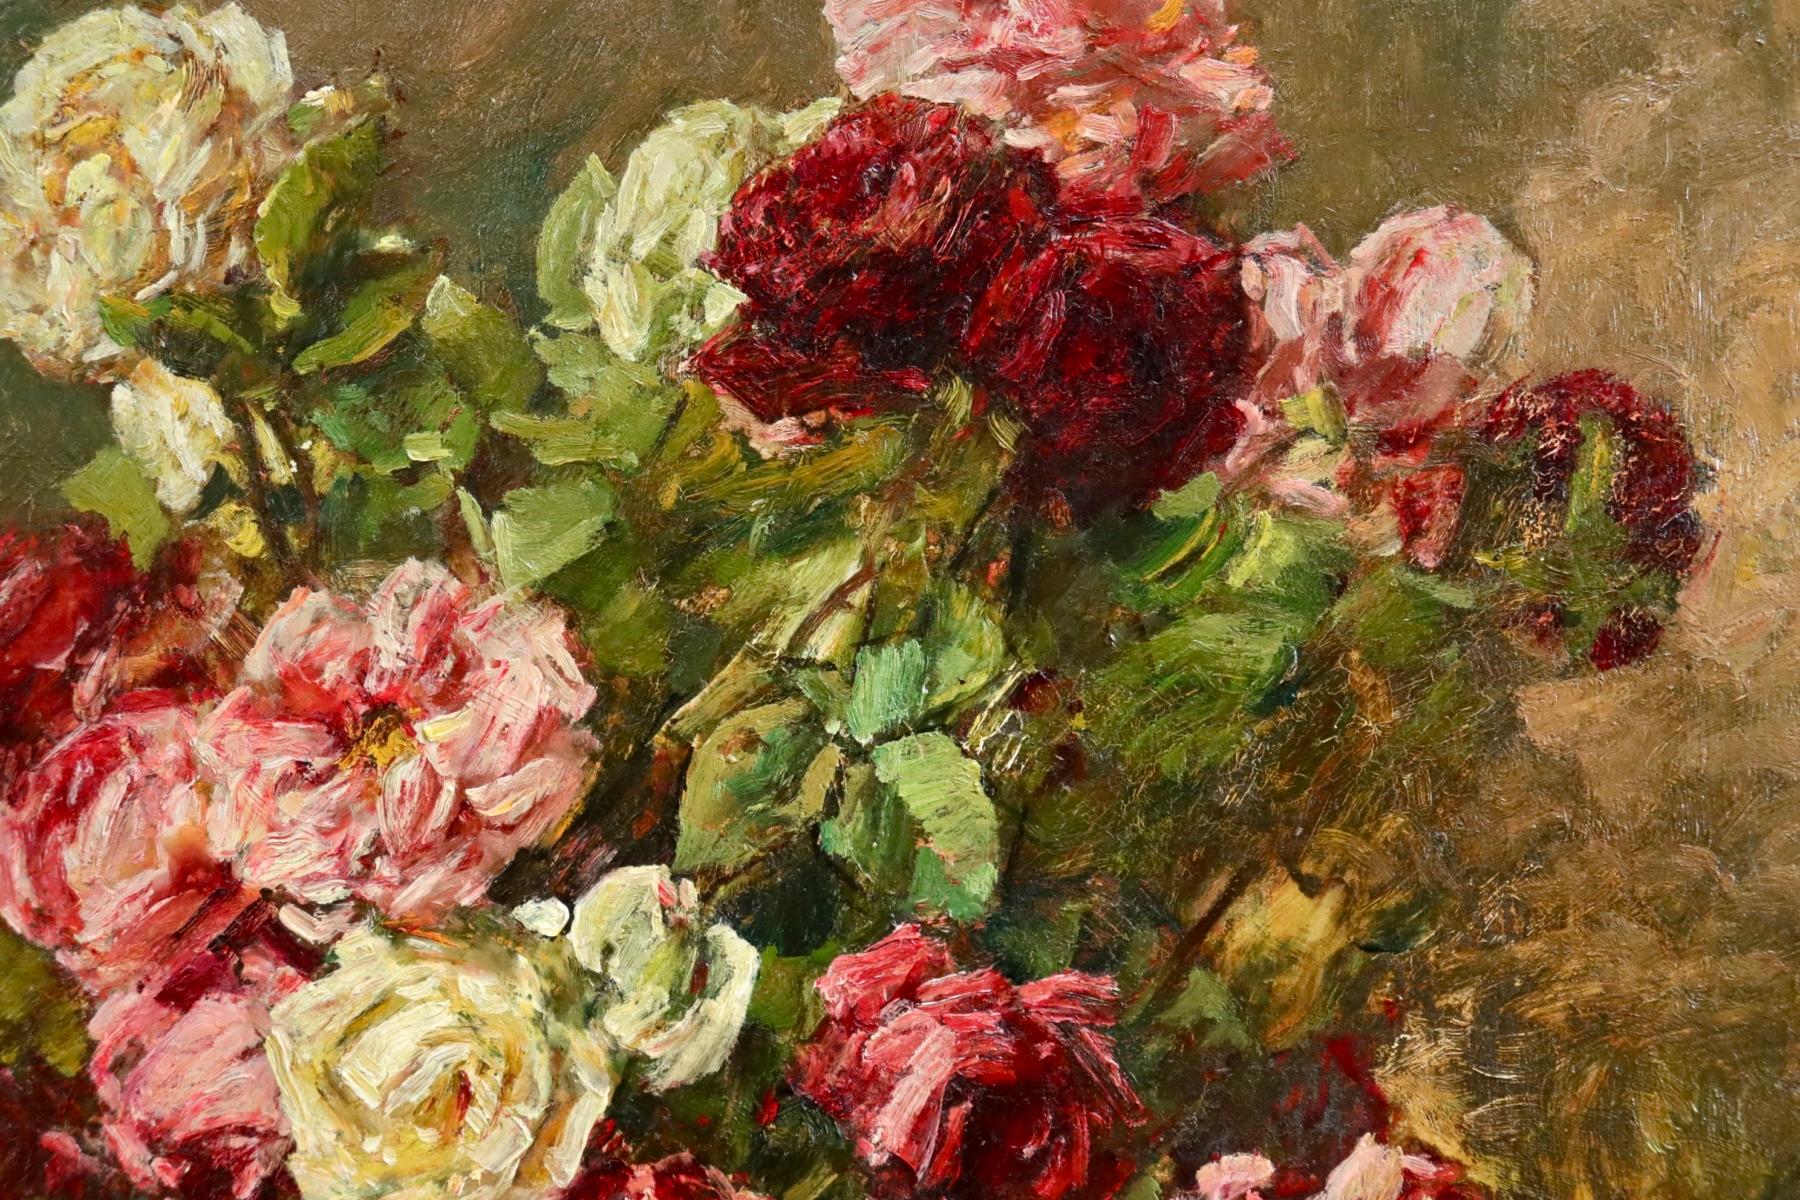 Oil on canvas by Georges Jeannin depicting a green ceramic vase filled with red, pink and cream flowers on a table in an interior. Signed and dated lower left. Framed dimensions are 40 inches high by 34 inches wide.

Georges Jeannin painted bouquets